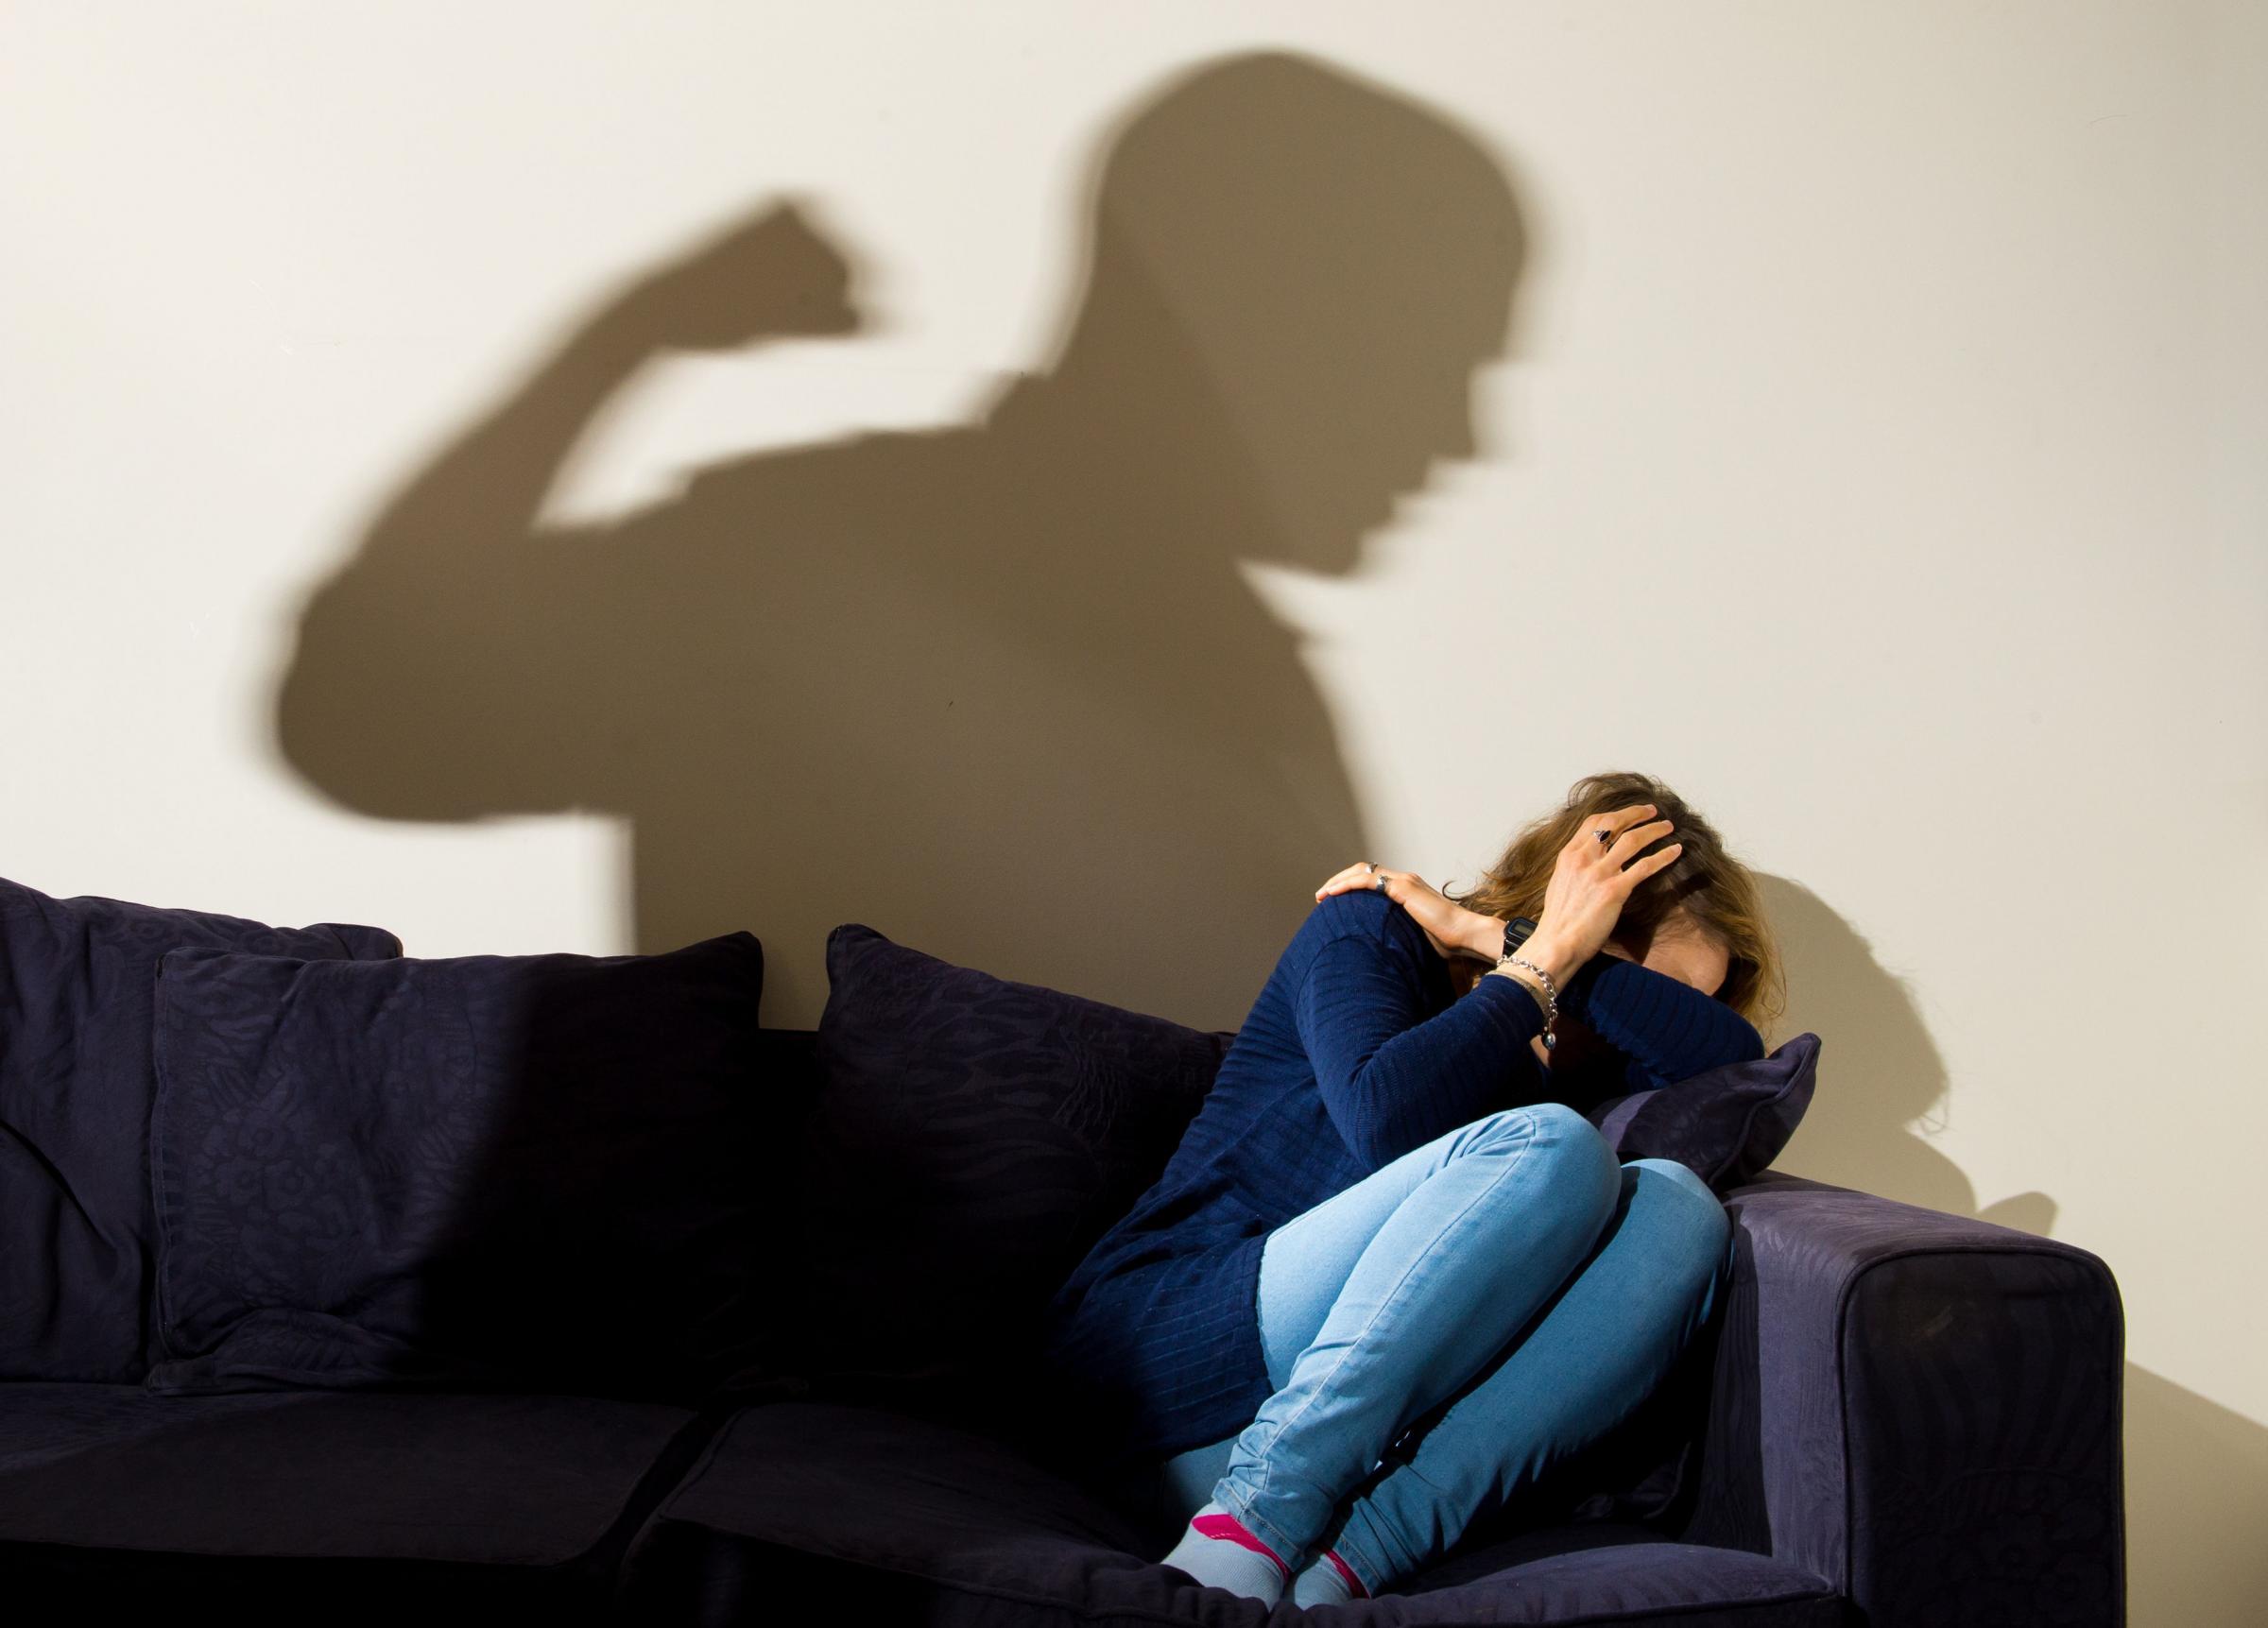 West Dunbartonshire Domestic Violence: Attacks against women rise